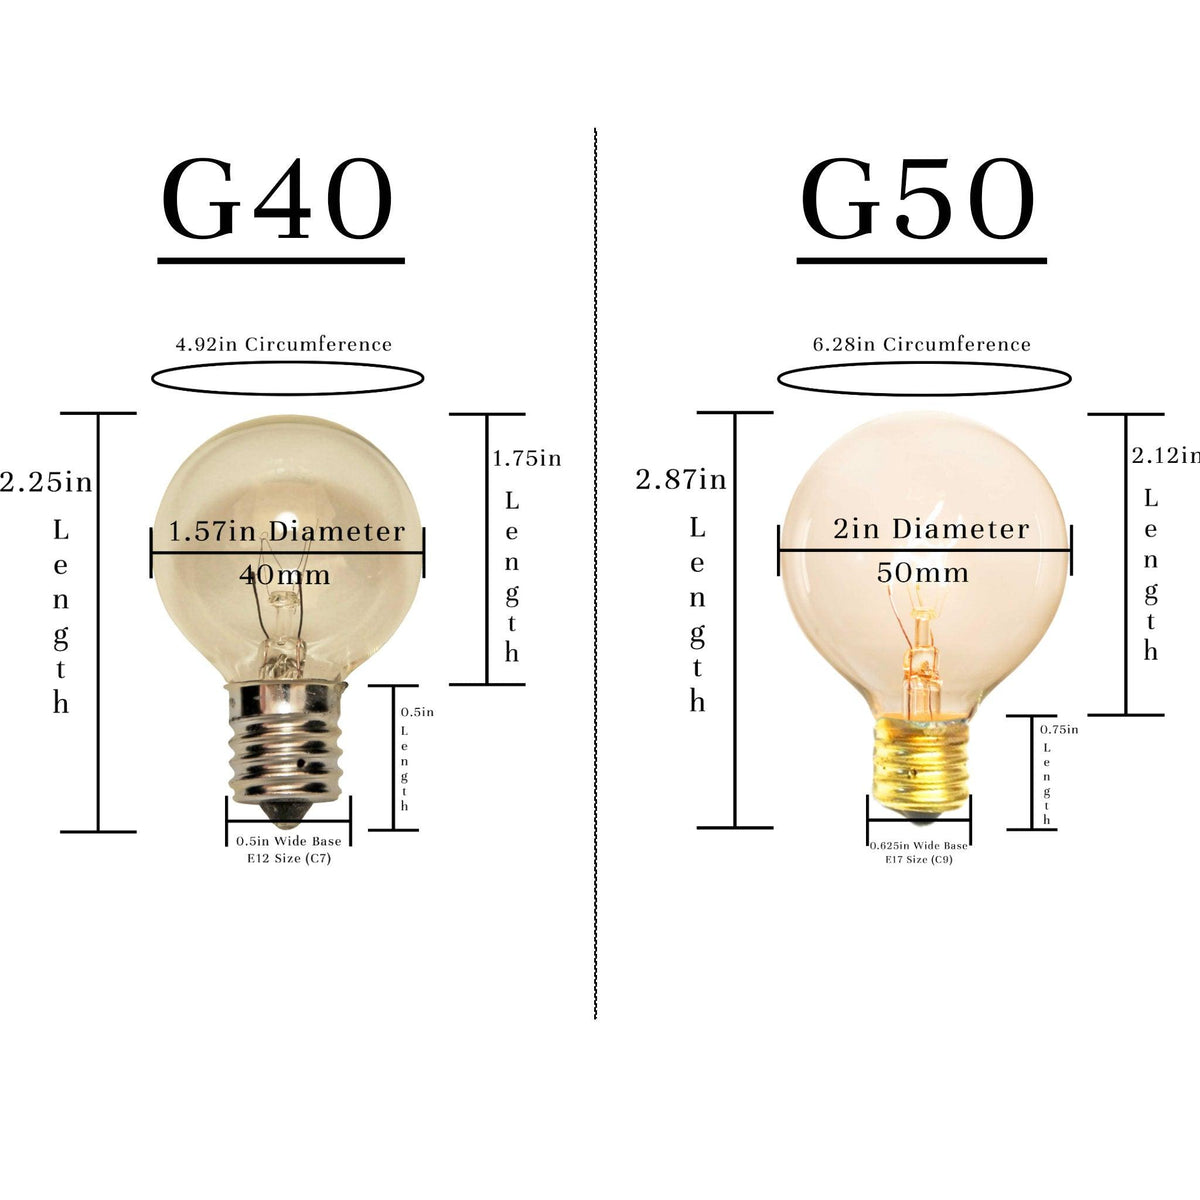 1 Box of 25 of brand new transparent Blue G40 Globe Light Bulbs Replace your old bulbs today at leedisplay.com